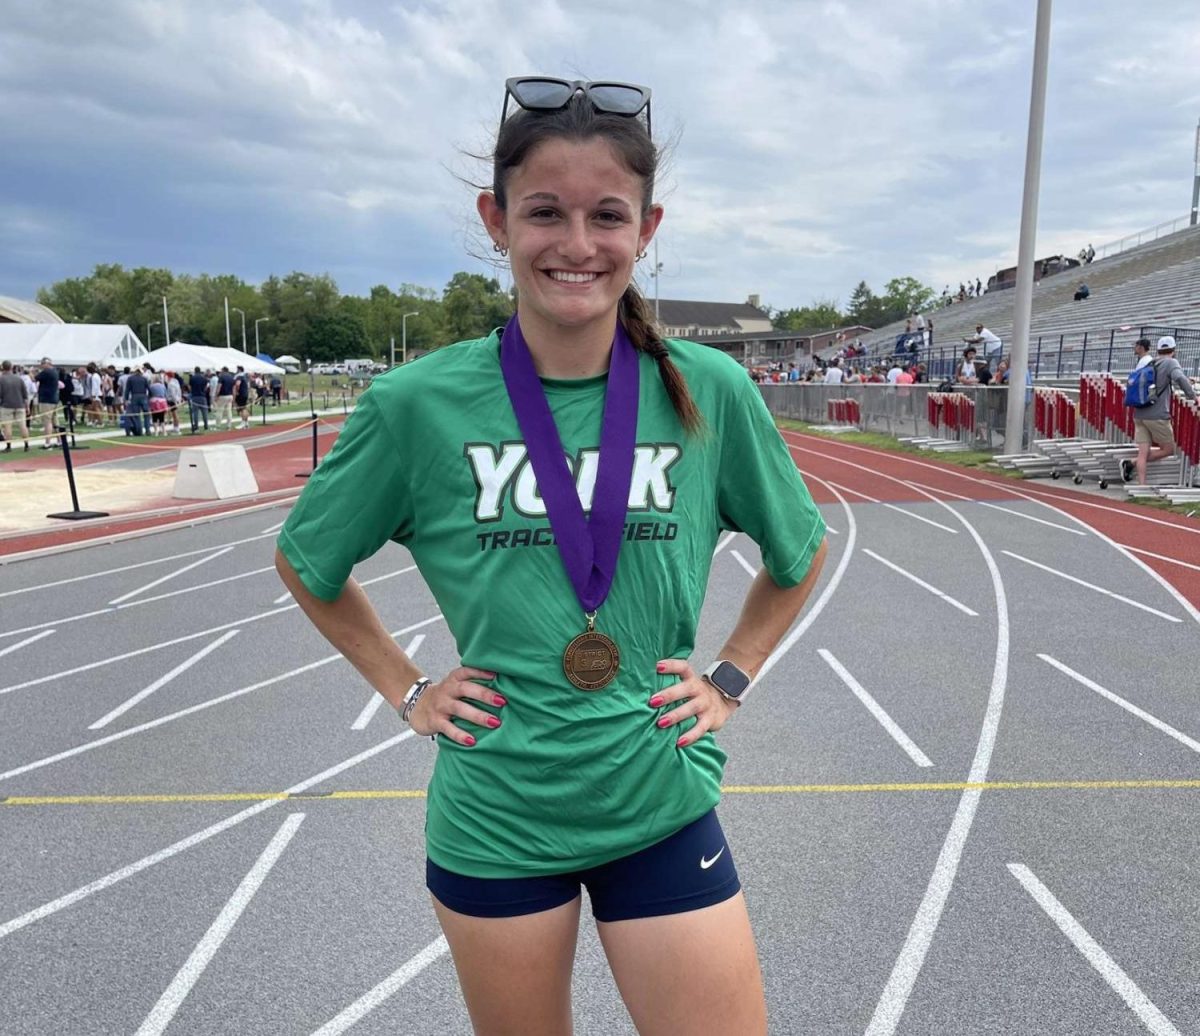 Cottrell%2C+sporting+her+York+College+t-shirt%2C+after+placing+7th+in+the+district+for+the+200m.+This+was+her+first+and+last+districts+during+her+senior+year+at+Dallastown+in+2023.